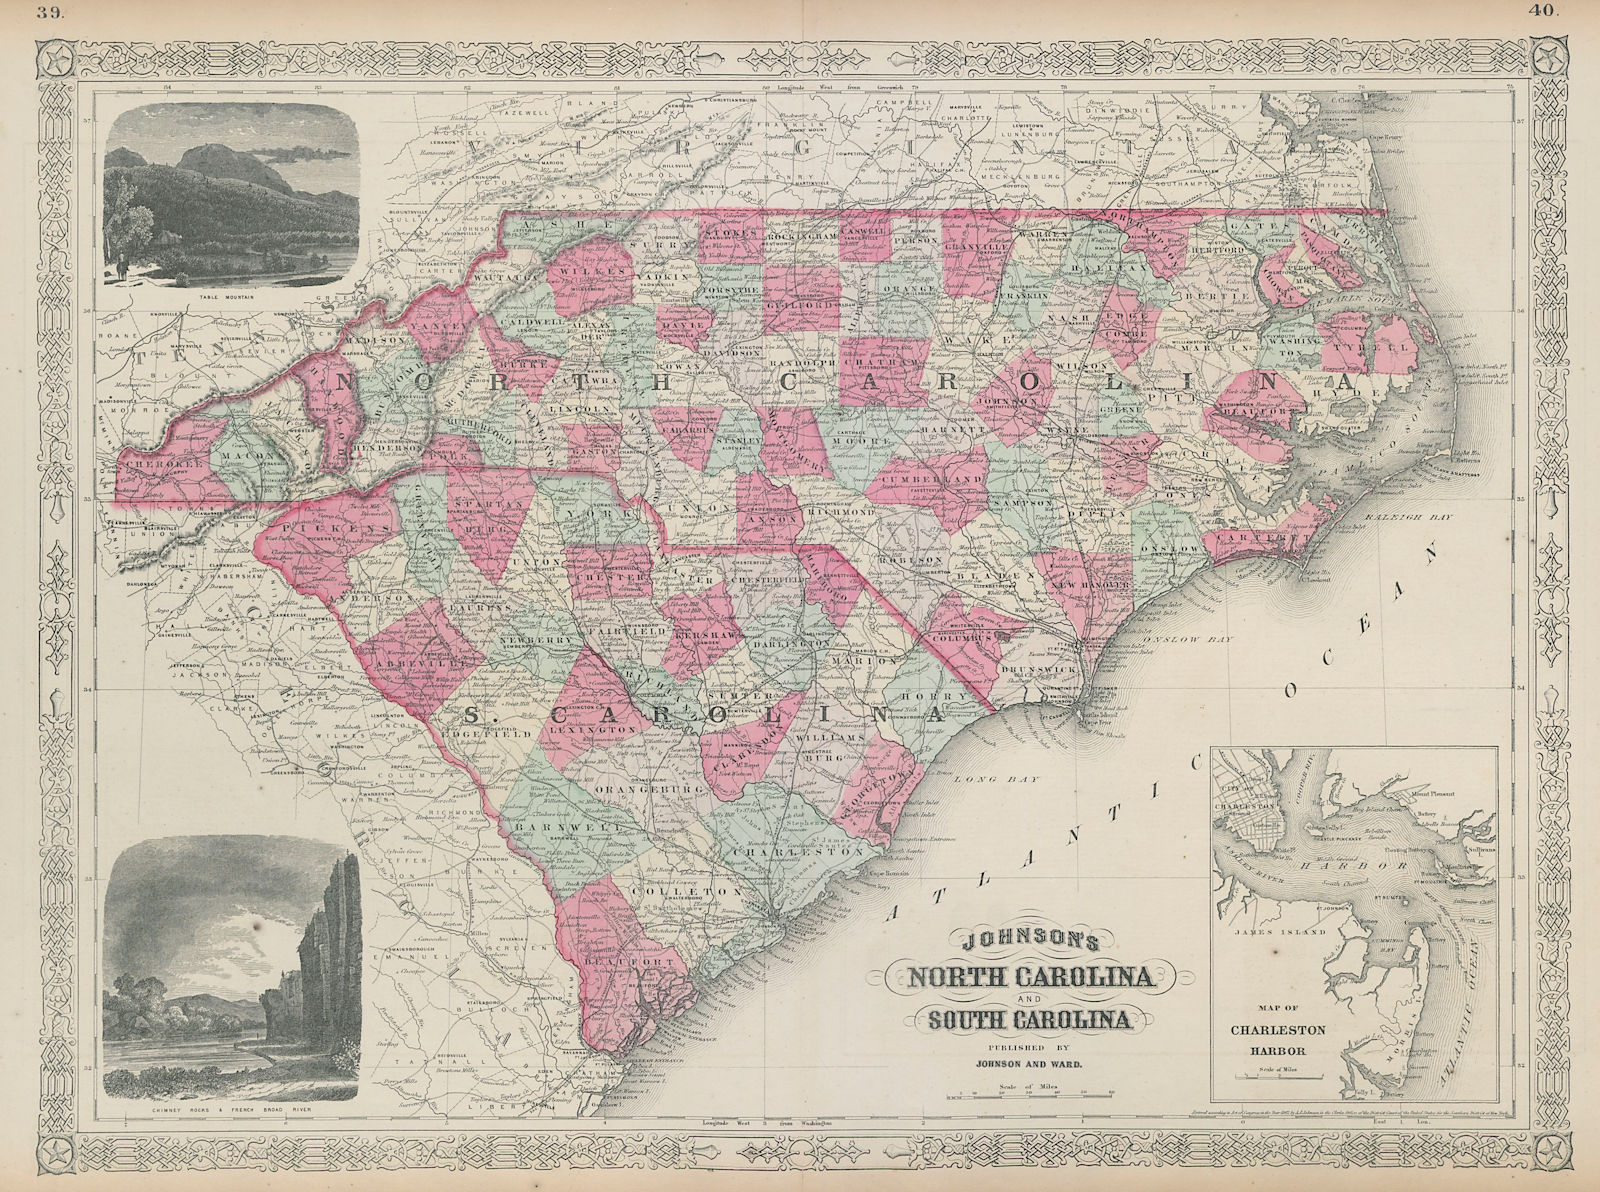 Associate Product Johnson's North & South Carolina showing counties. Charleston 1865 old map